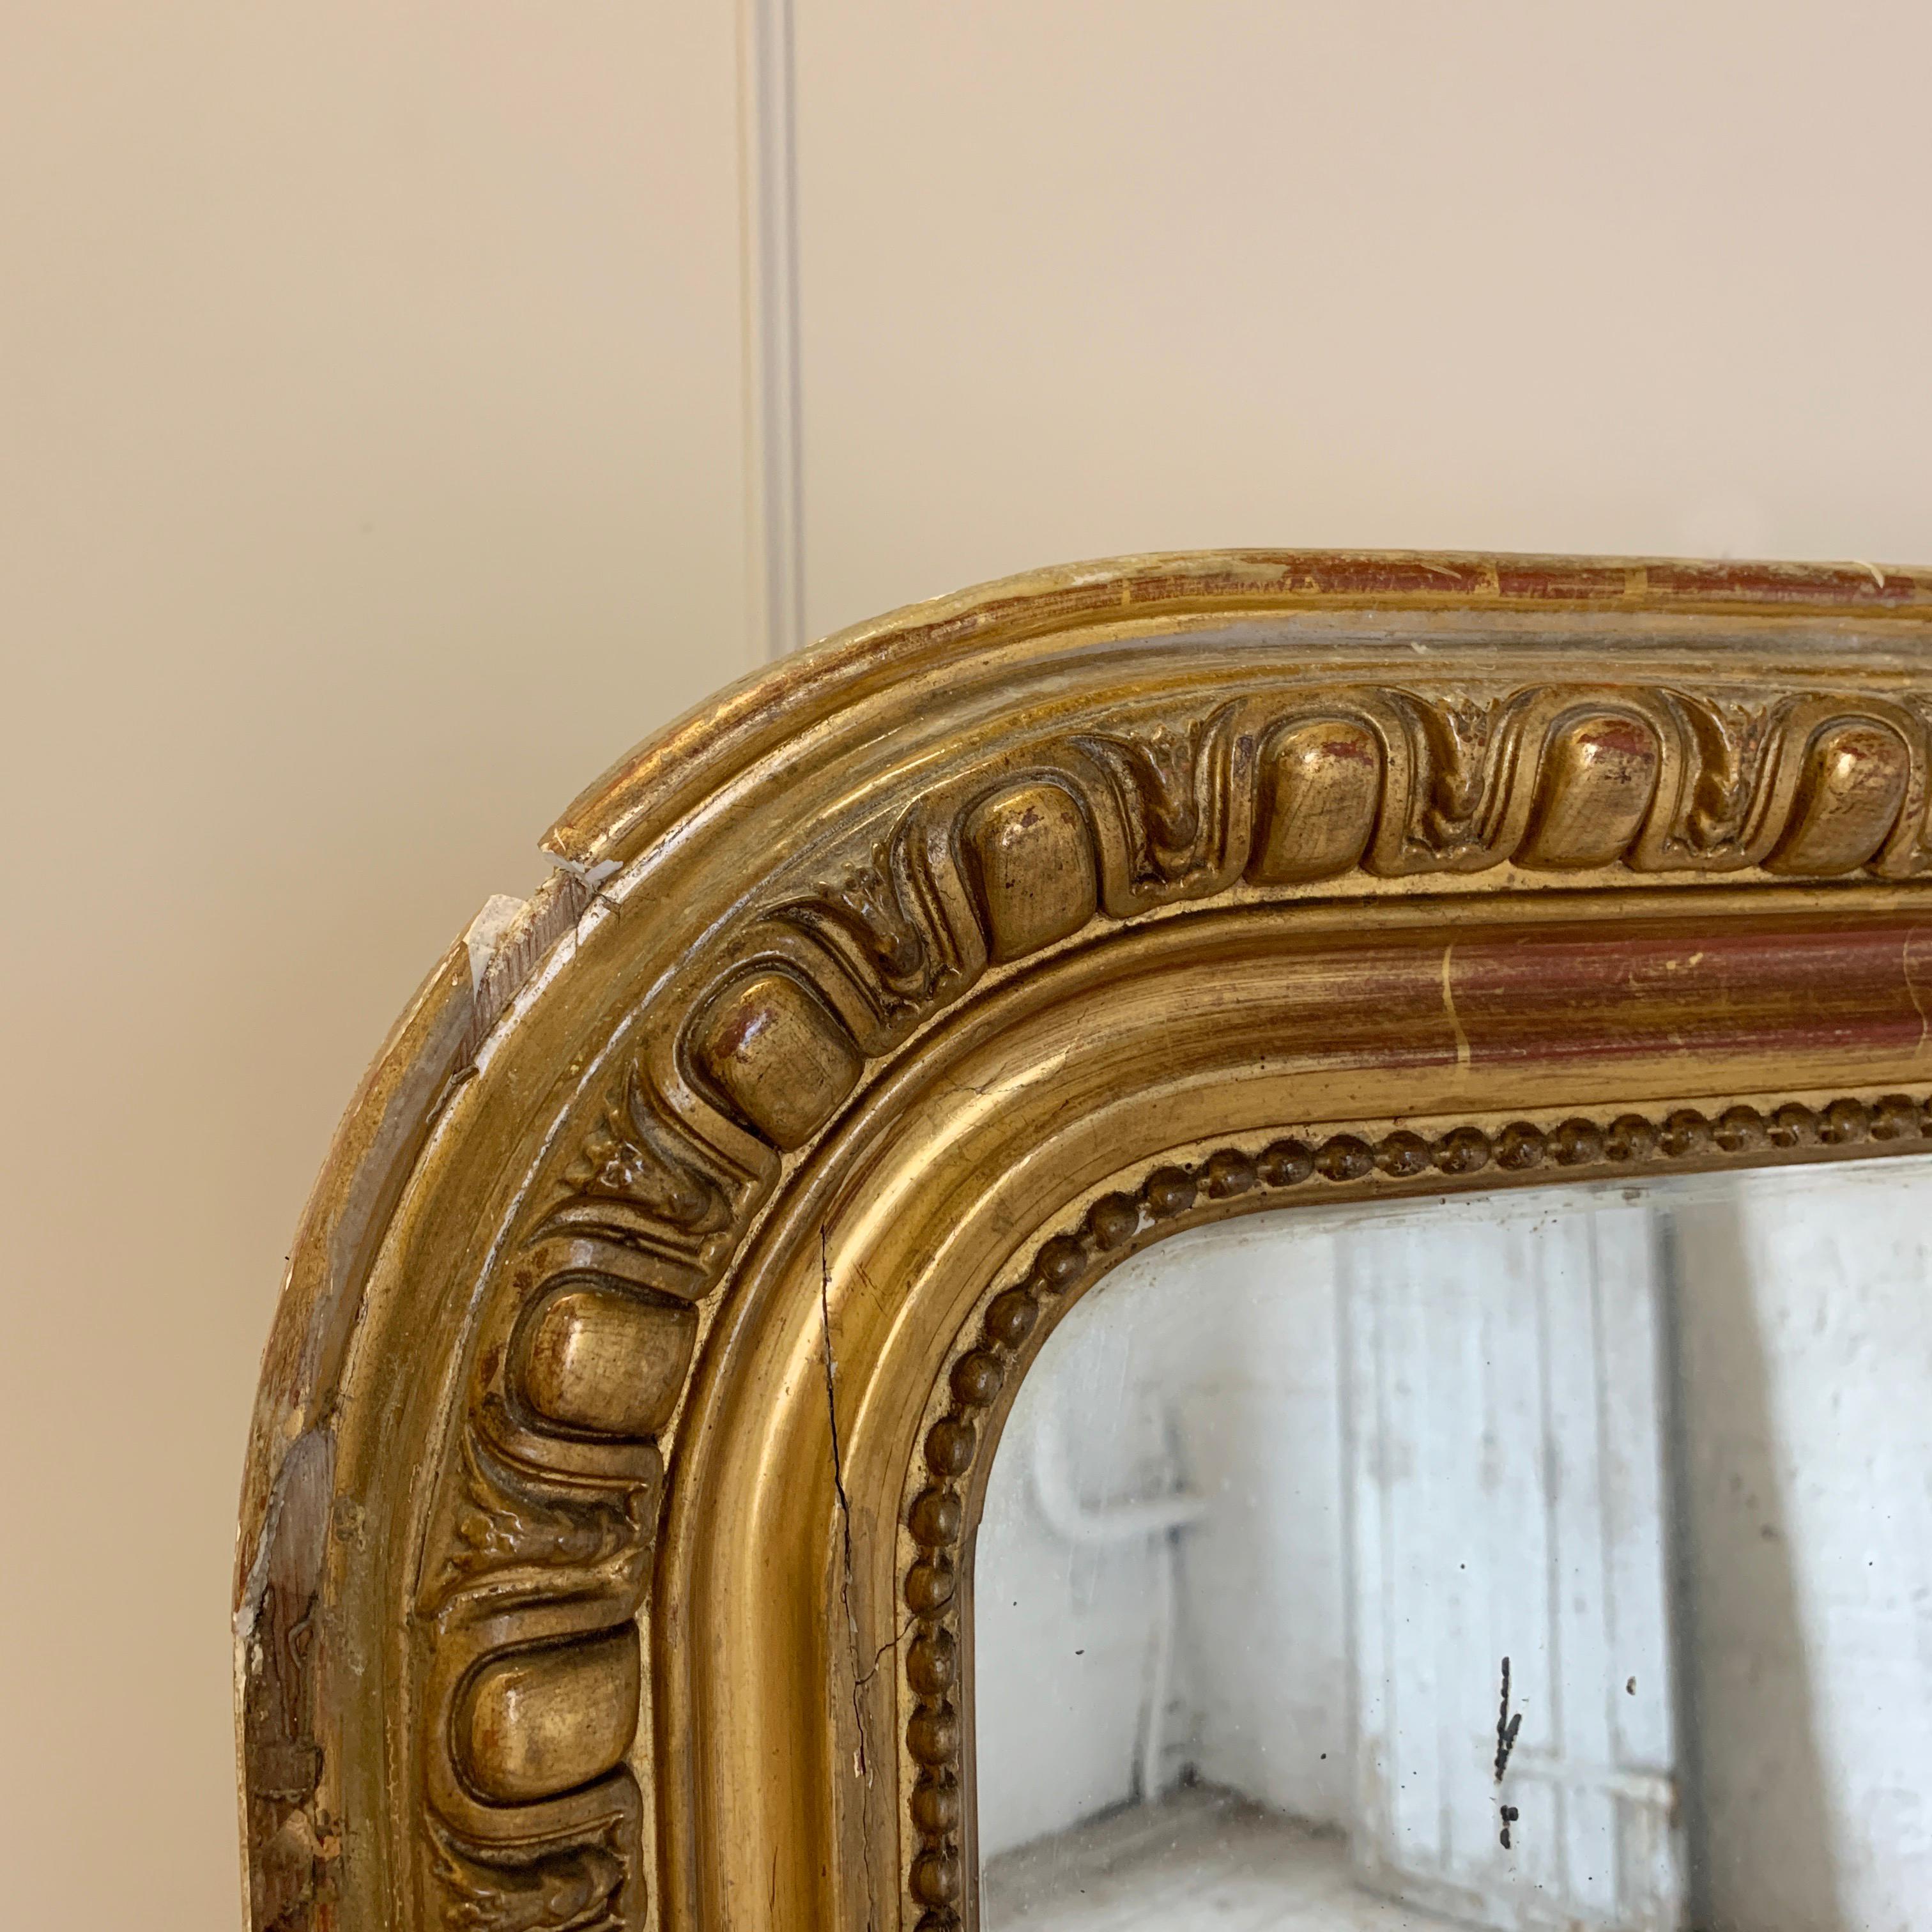 Beautiful, very large antique French Louis overmantle mirror. French, circa 1800s. Carved wooden frame with decorative gesso egg and dart pattern mouldings. Gilt finish. 120cm width, 144.5cm height, 7cm depth. This is a heavy mirror. Original wooden